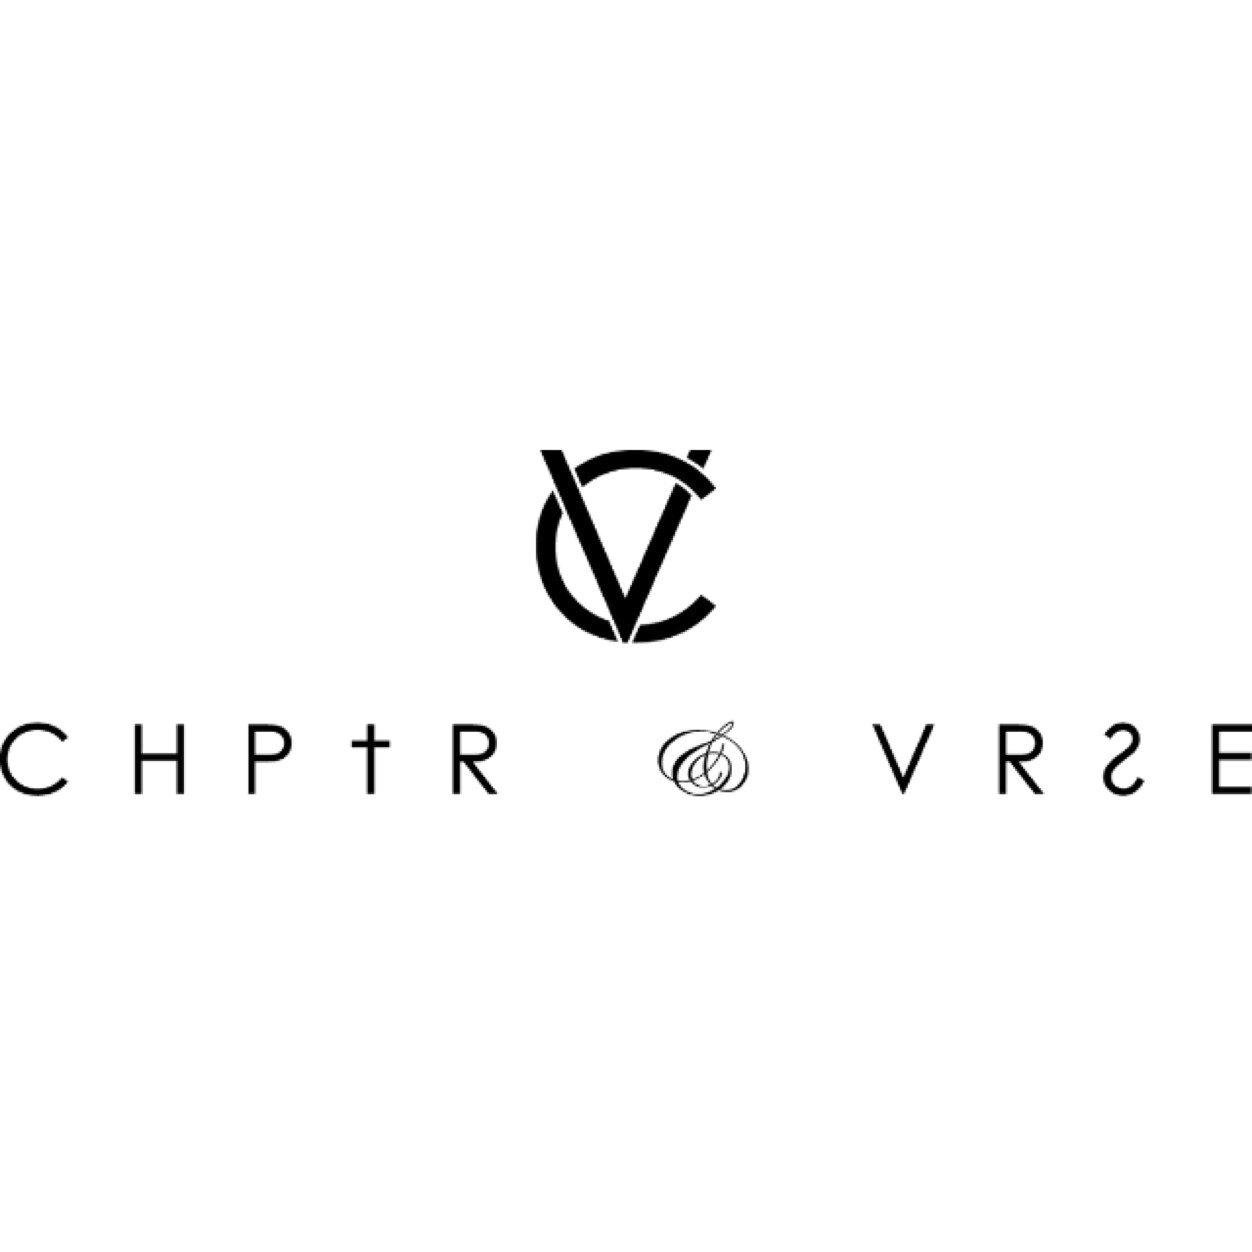 The Chaptr & Vrse brand is best know for it’s premium and unique graphics, printed t-shirts & sweats form the core signature of the brand.